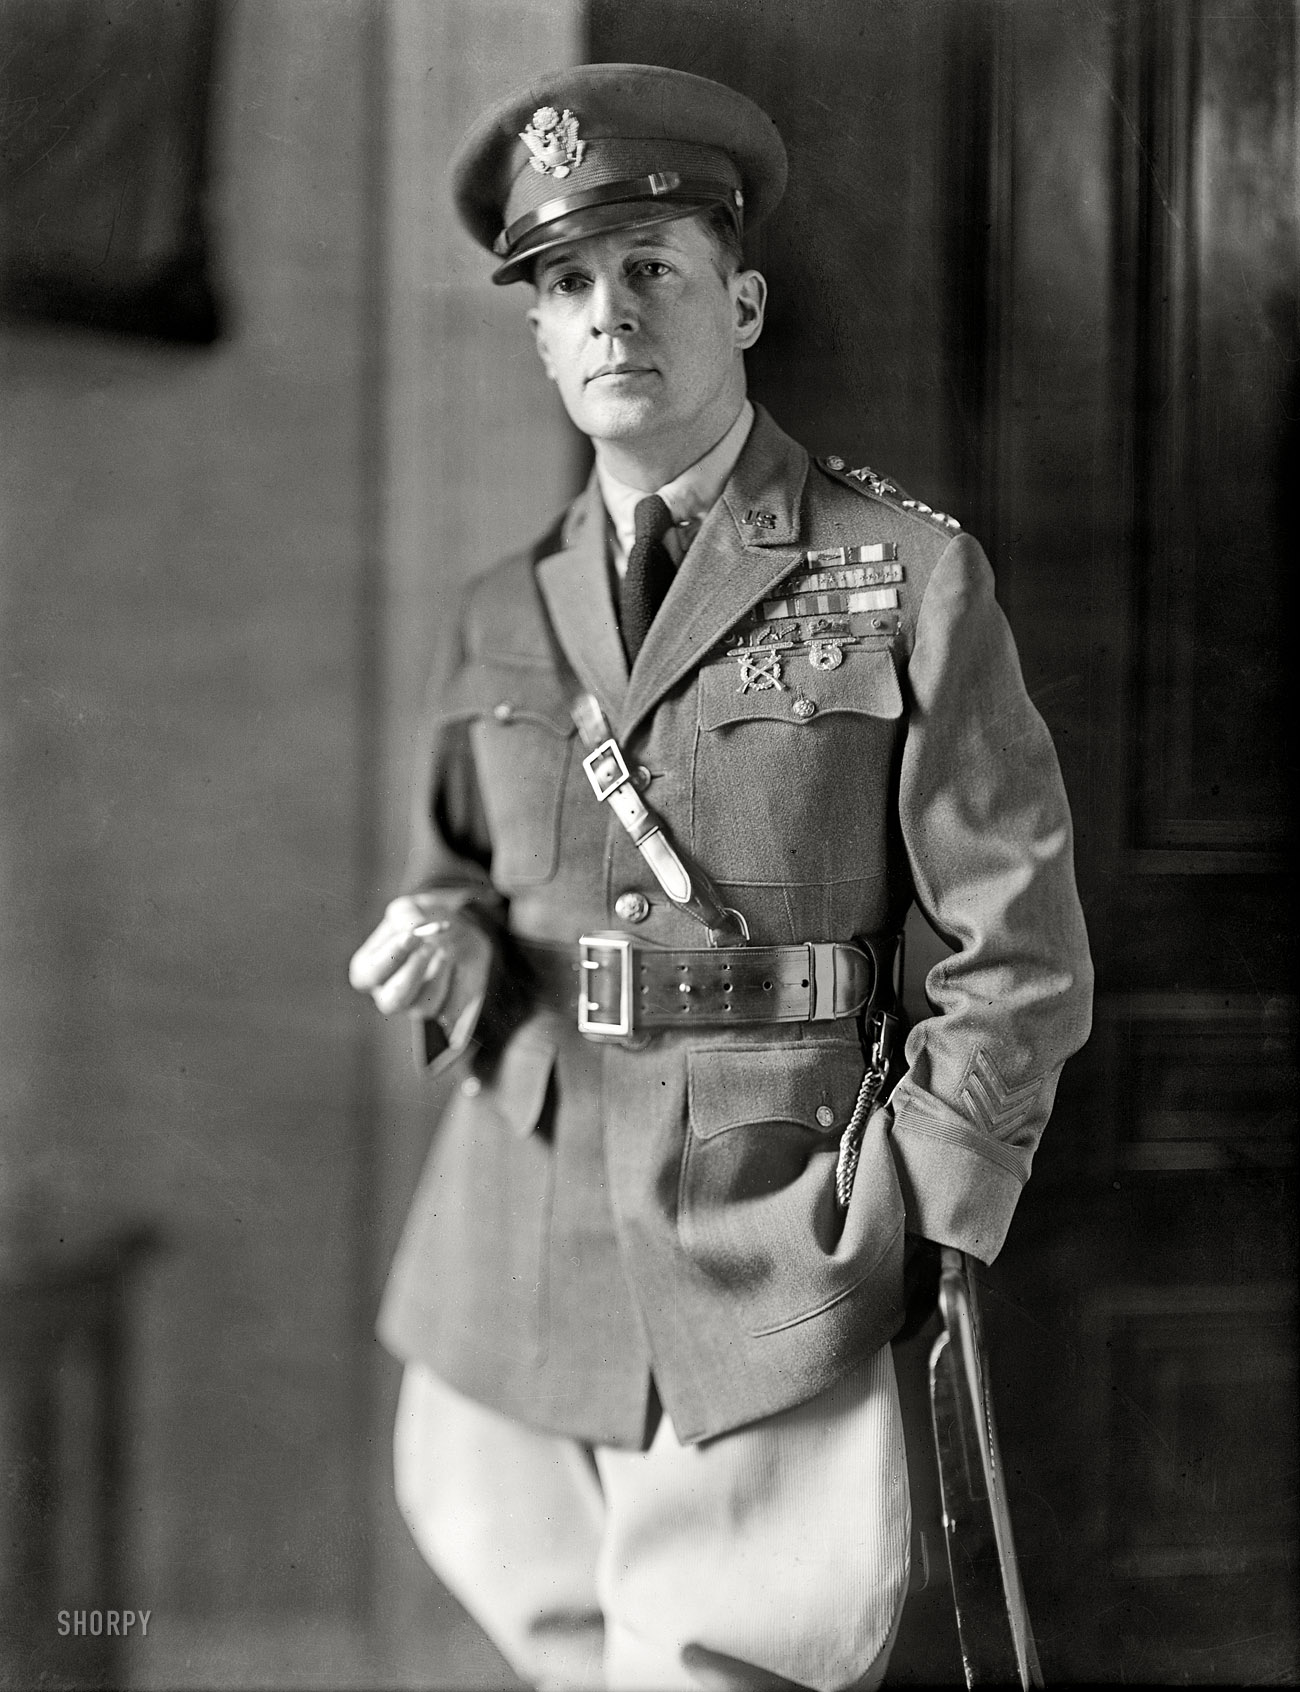 November 1930. Washington, D.C. "MacArthur, Douglas, General." Pipe, corncob, evidently at the cleaners. Harris & Ewing glass negative. View full size.